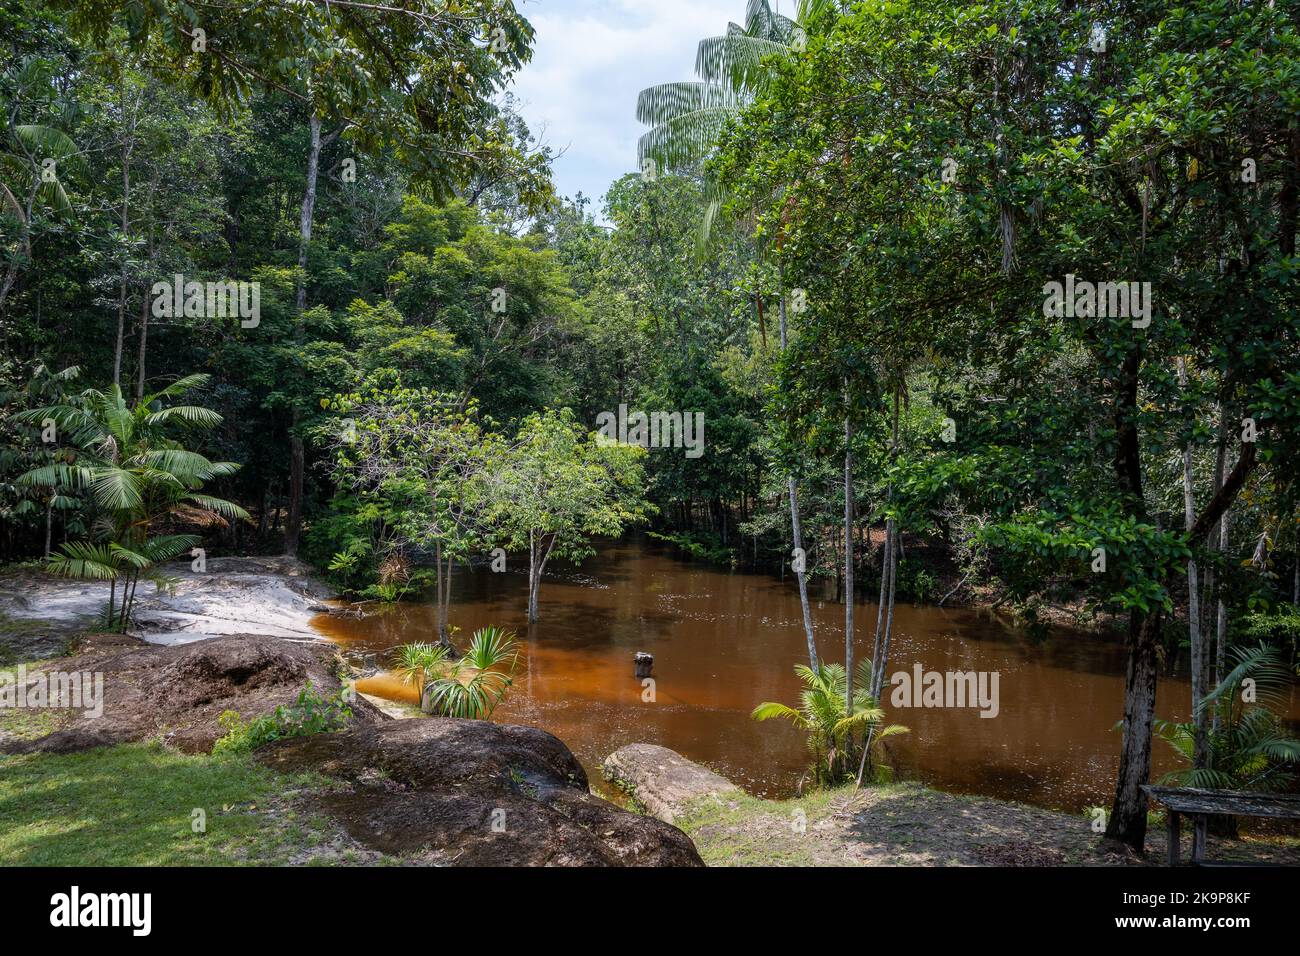 Dark brown, organic rich water in a stream running through tropical forest in the Amazon basin. Amazonas, Brazil Stock Photo